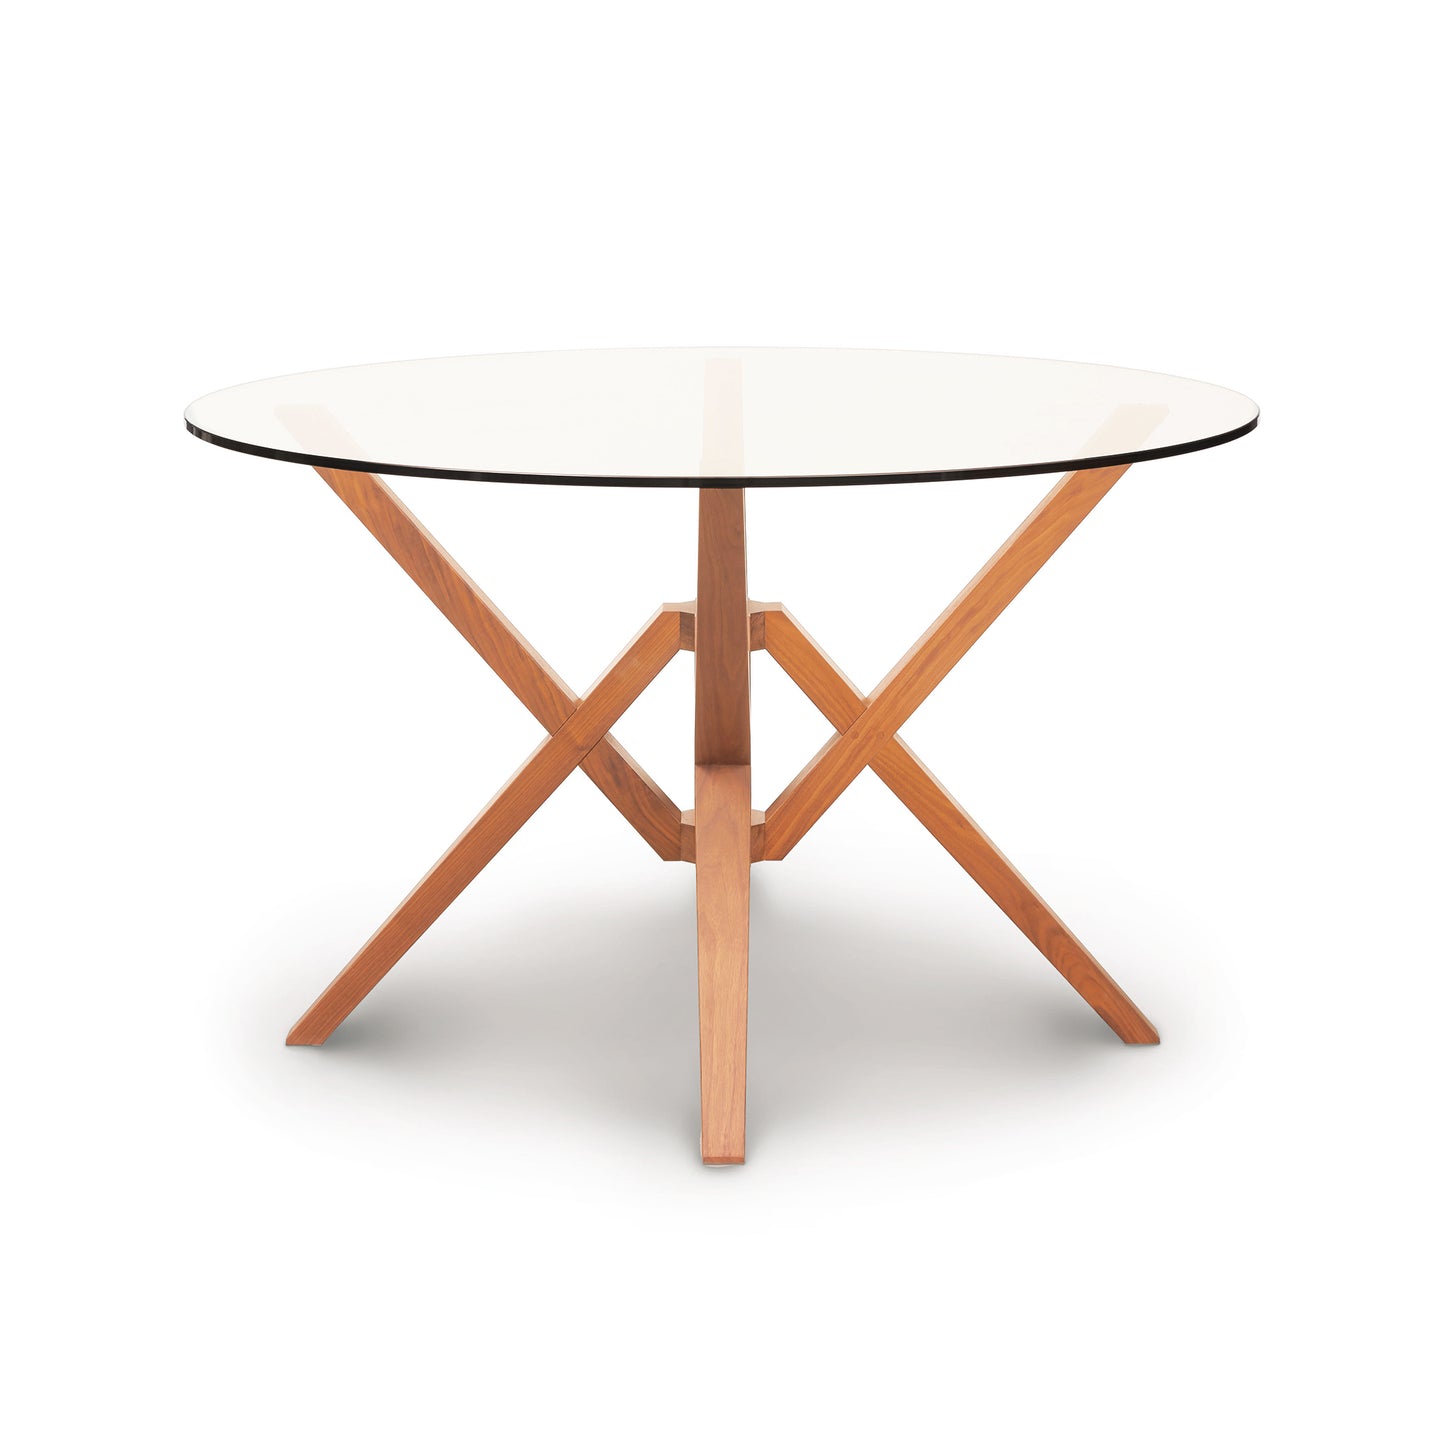 Copeland Furniture Exeter Round Glass Top Table with a solid wood crossed-leg base on a white background.